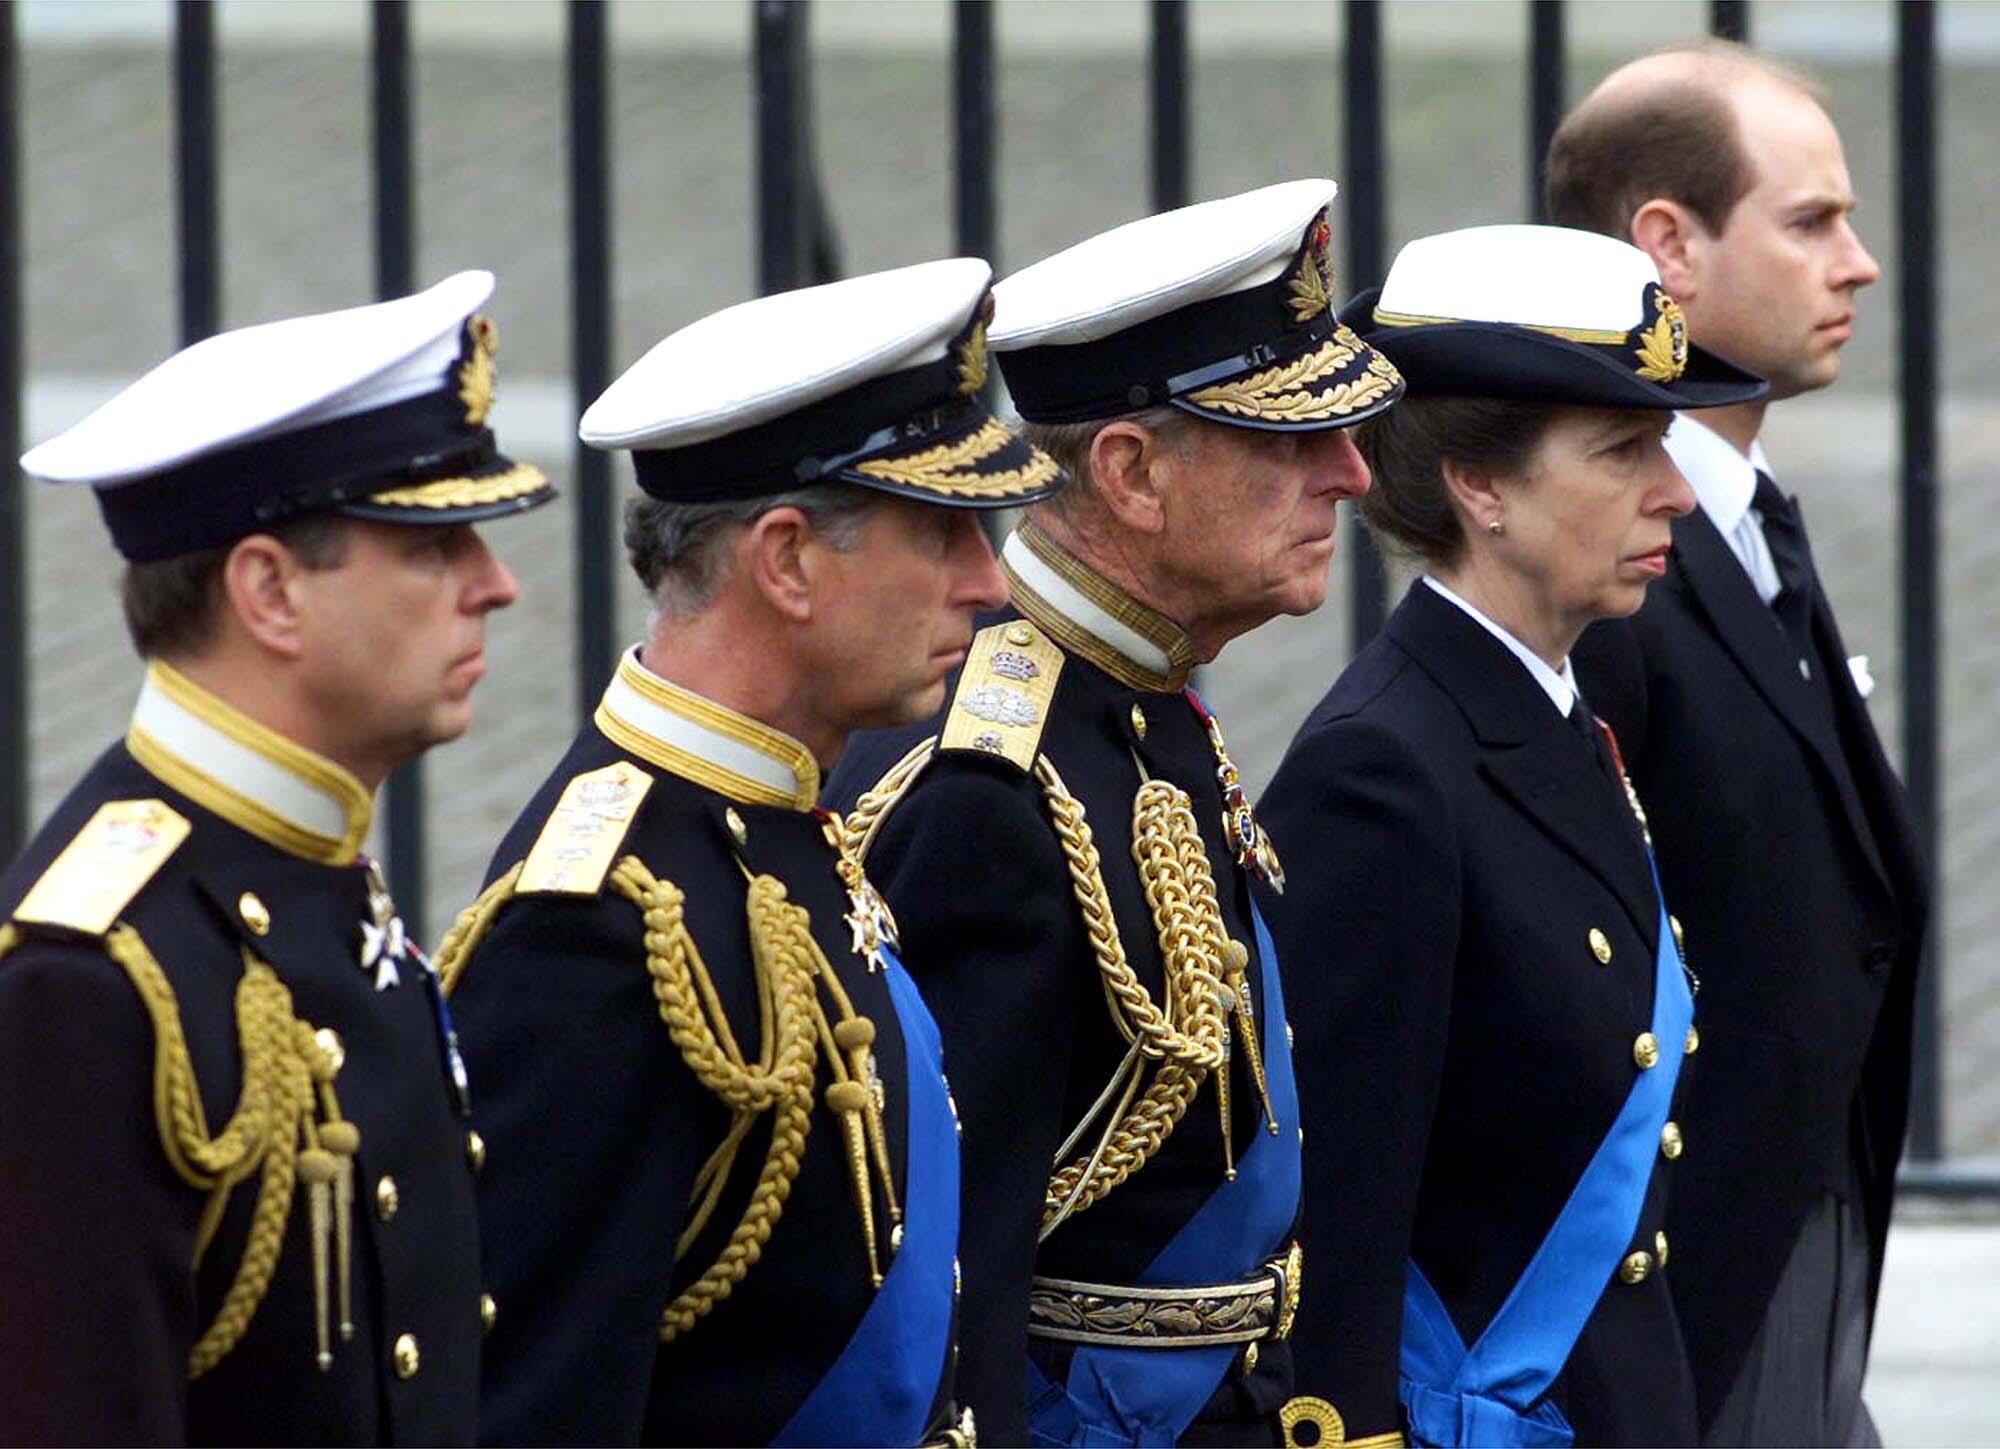 Royal family members line up for a funeral